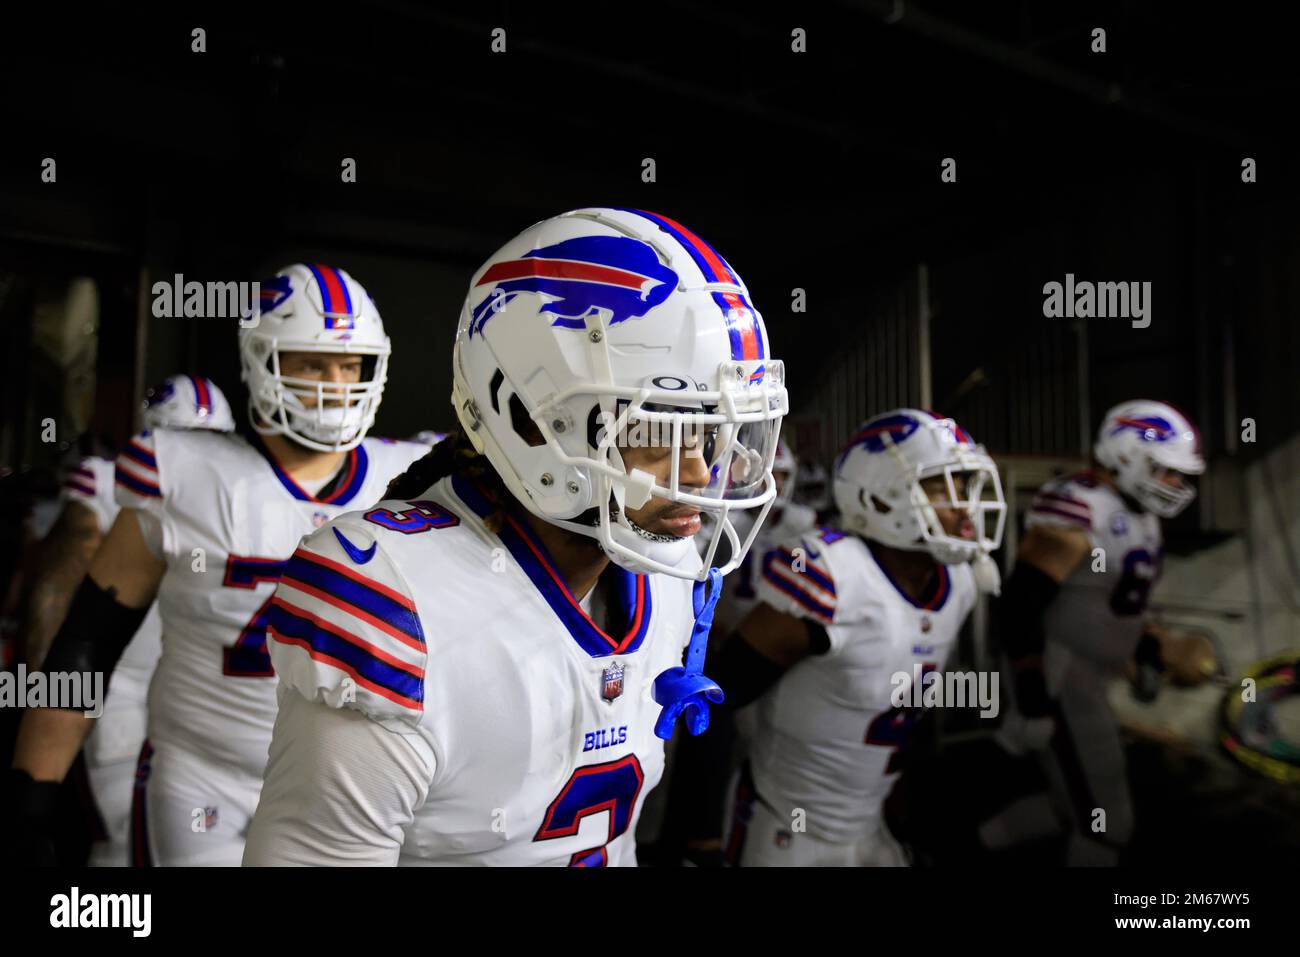 Cincinnati, Ohio, USA. 2nd Jan, 2023. Buffalo Bills safety DAMAR HAMLIN (3) exiting the tunnel prior to kickoff during week 17 of the NFL regular season between the Buffalo Bills and Cincinnati Bengals in Cincinnati on Monday Night Football match. Safety Damar Hamlin (3) was seriously injured on the field during the game. The game was postponed indefinitely after Hamlin collapsed. Hamlin is reported to be in critical condition. Credit: csm/Alamy Live News Stock Photo